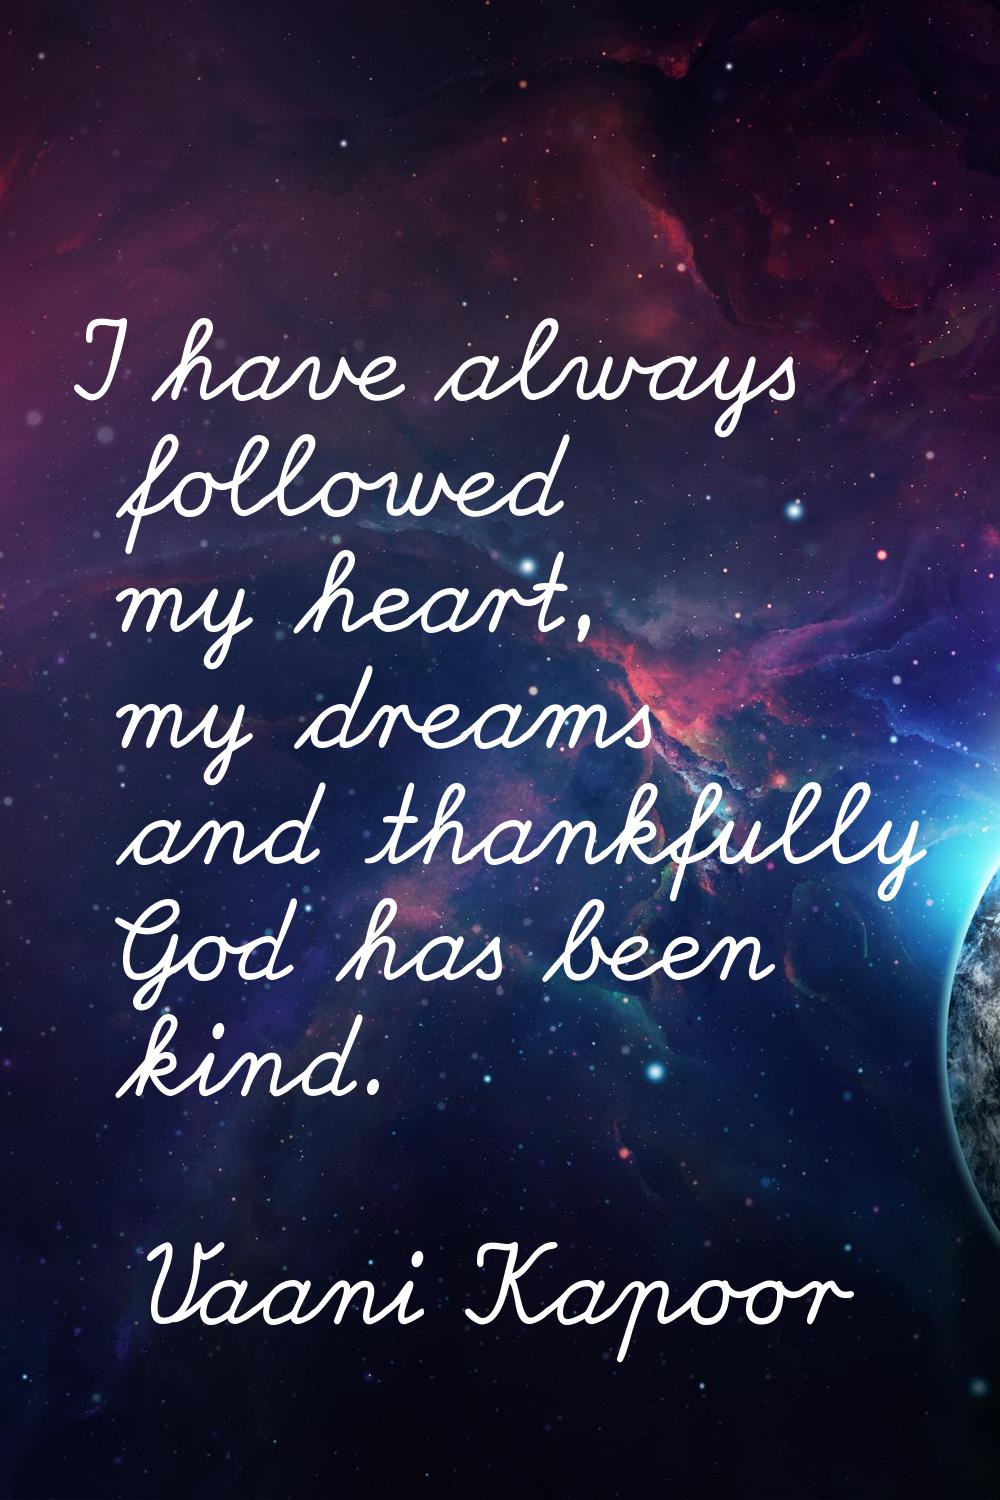 I have always followed my heart, my dreams and thankfully God has been kind.